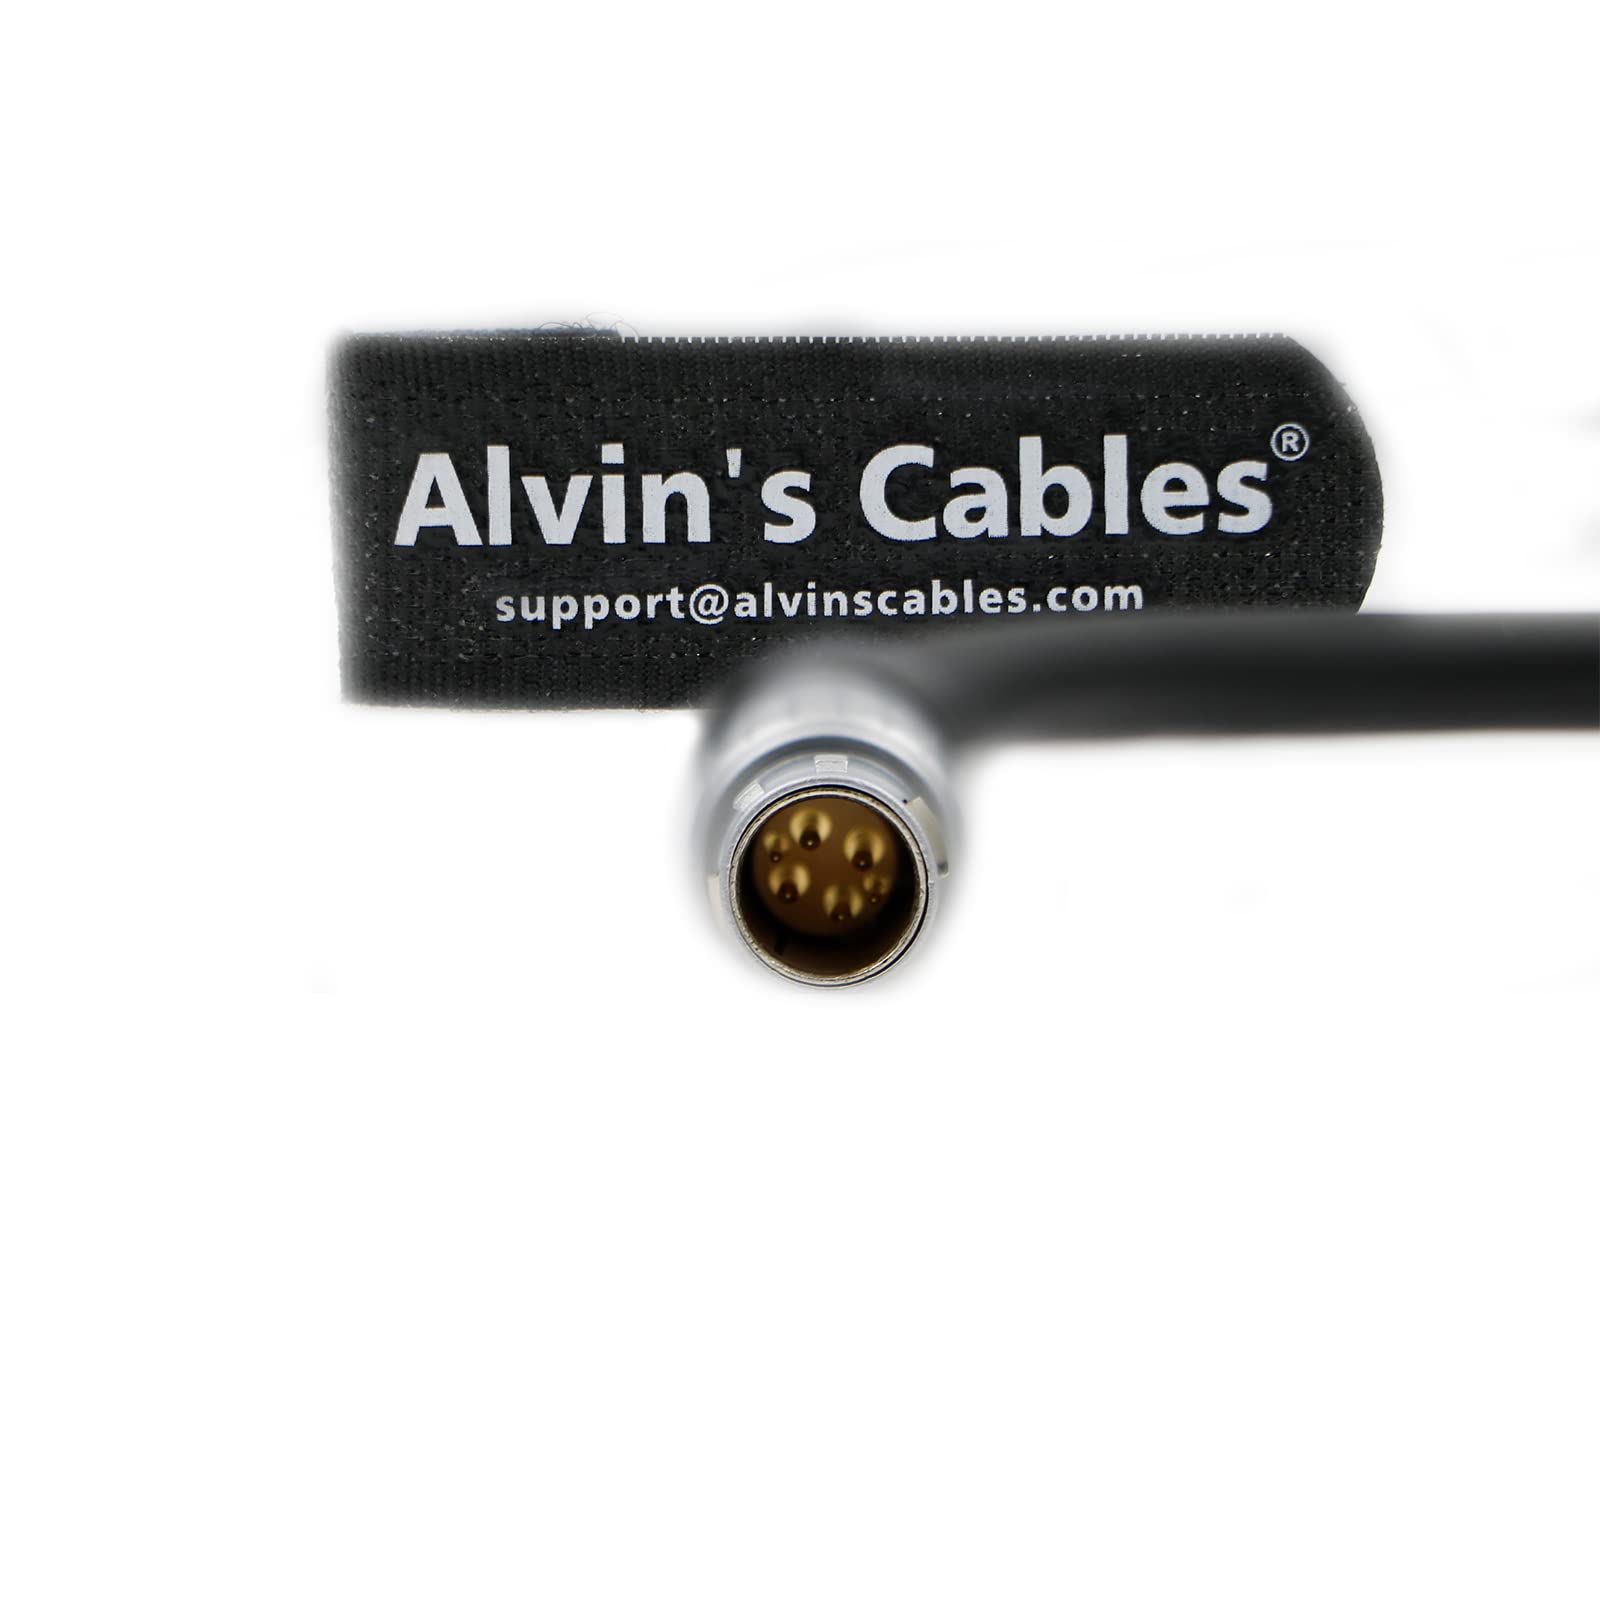 Alvin’s Cables 6 Pin Male to Right Angle 6 Pin Female Power-Cable for DJI Ronin-2 Gimbal Stabilizer to RED Epic&Scarlet Epic 19.7Inches/50cm